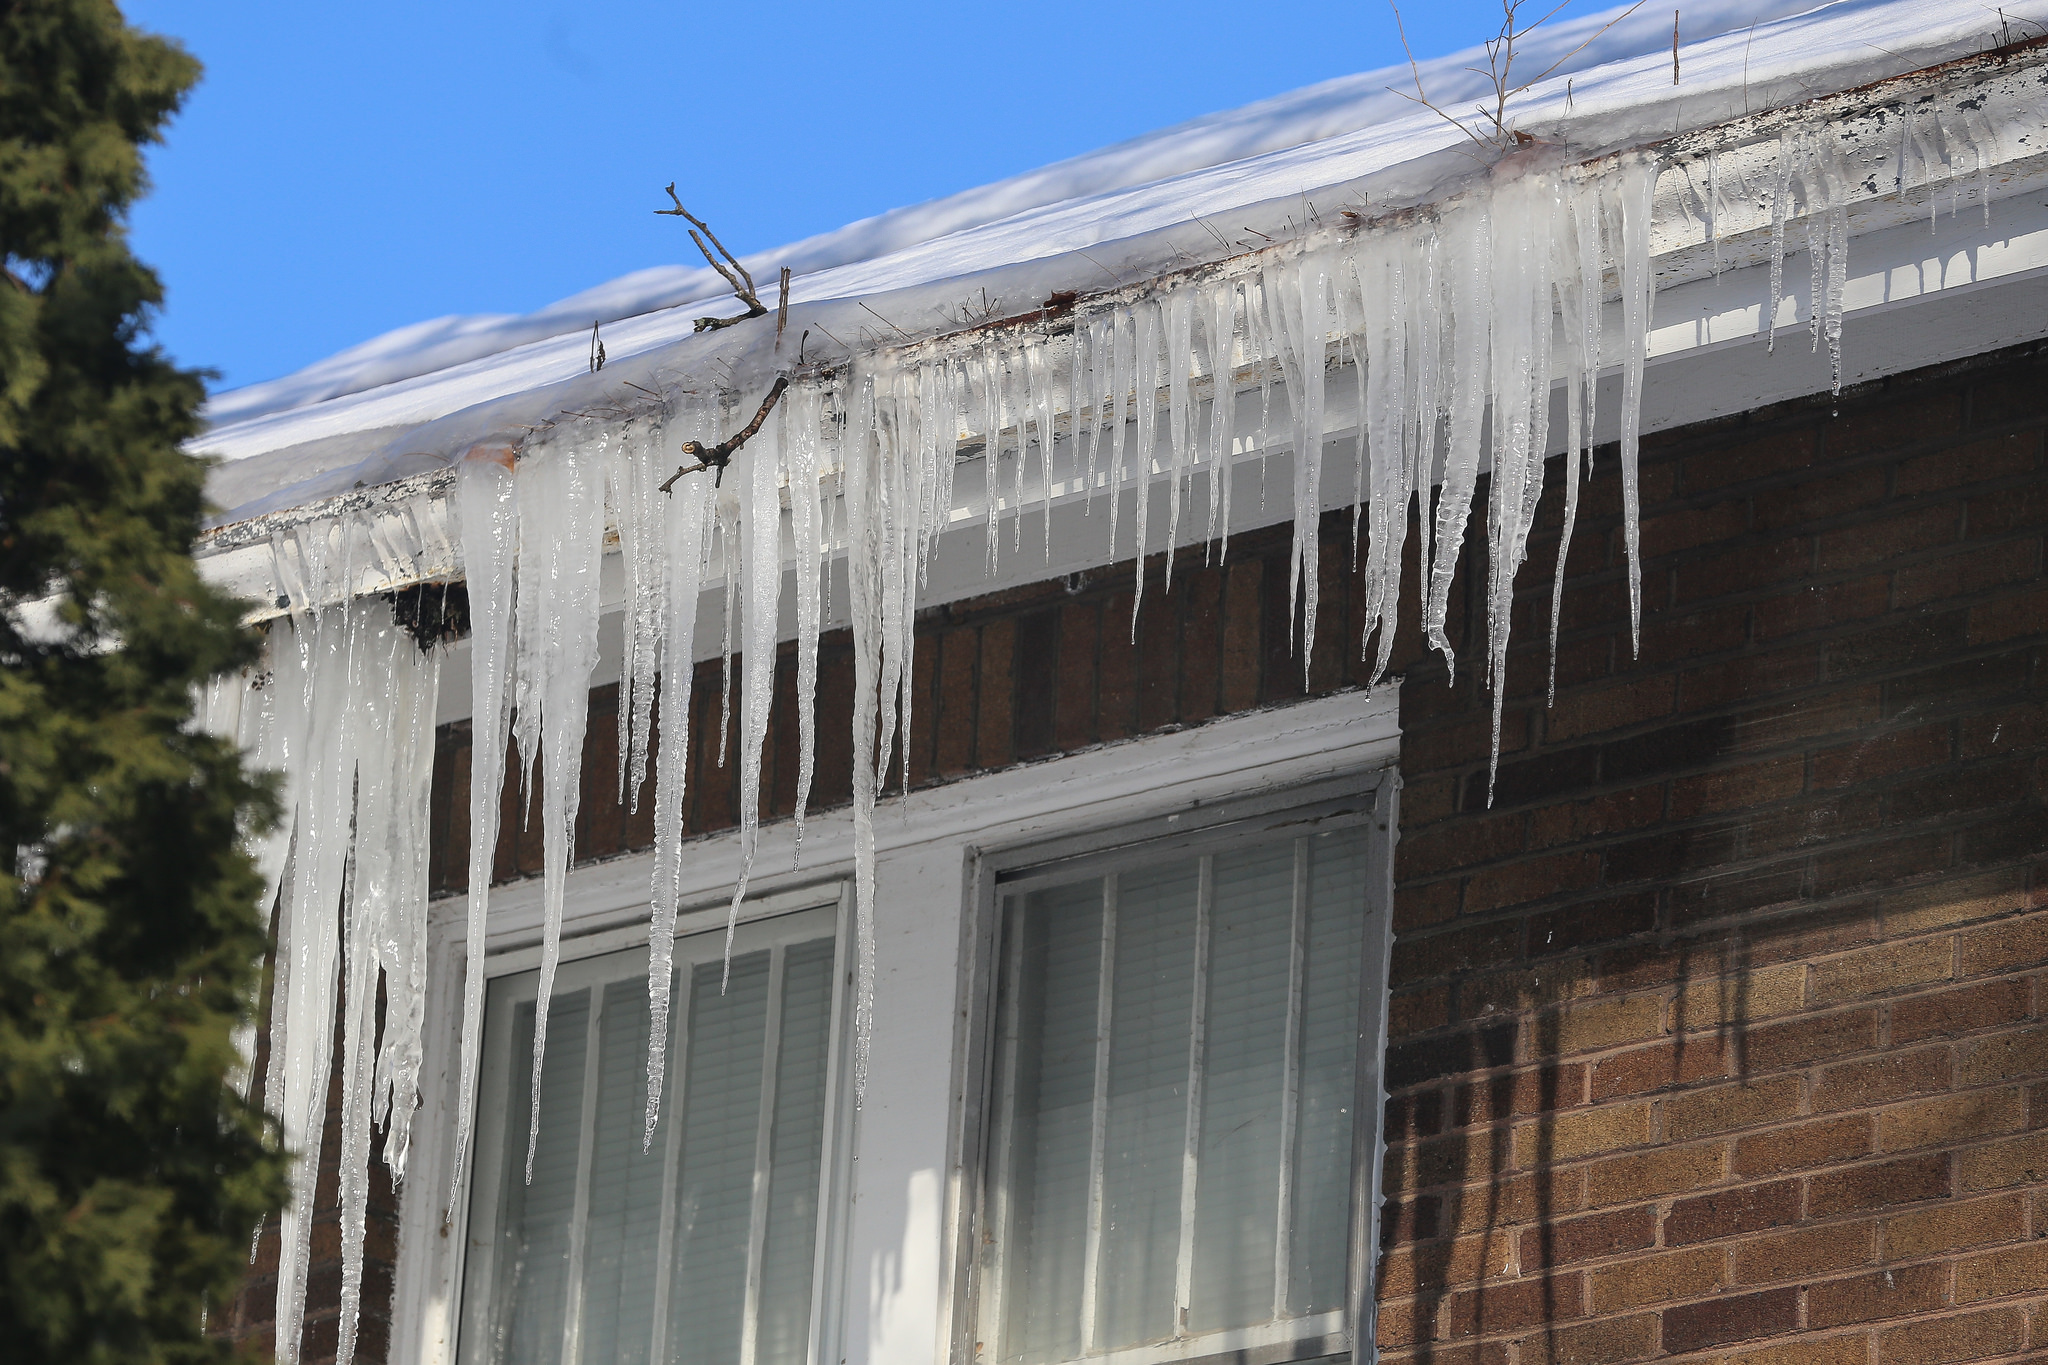 Open Freezing snowmelt can build up and form a dam of ice, behind which water pools up into large puddles or “ponds.” The ponding water can then back up under the roof covering and leak into the attic or along exterior walls.